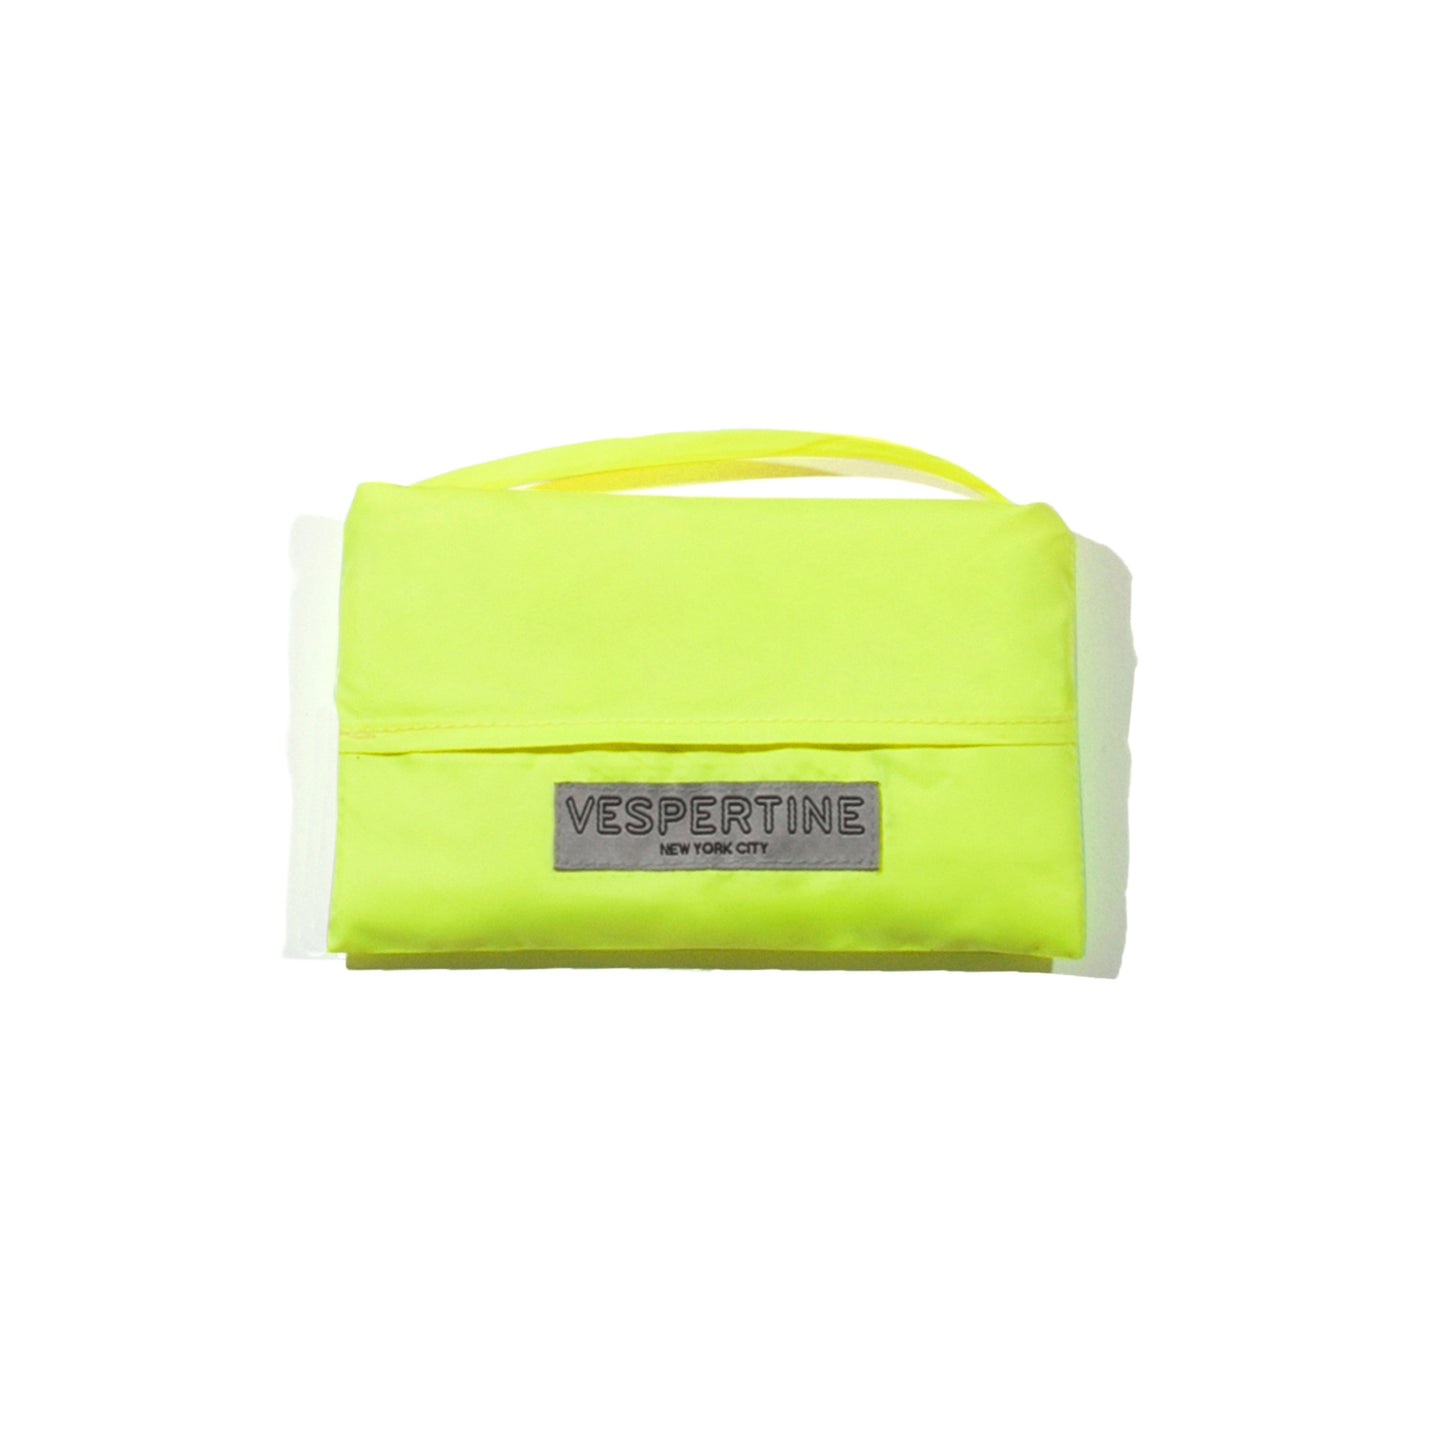 shown in pouch vespert eco citron neon yellow stylish reflective vis safety vest reflecting clothing high visibility gear accessory women fashion bike walk run dog walking walker night sustainable nighttime bright 3M scotchlite made in NYC USA